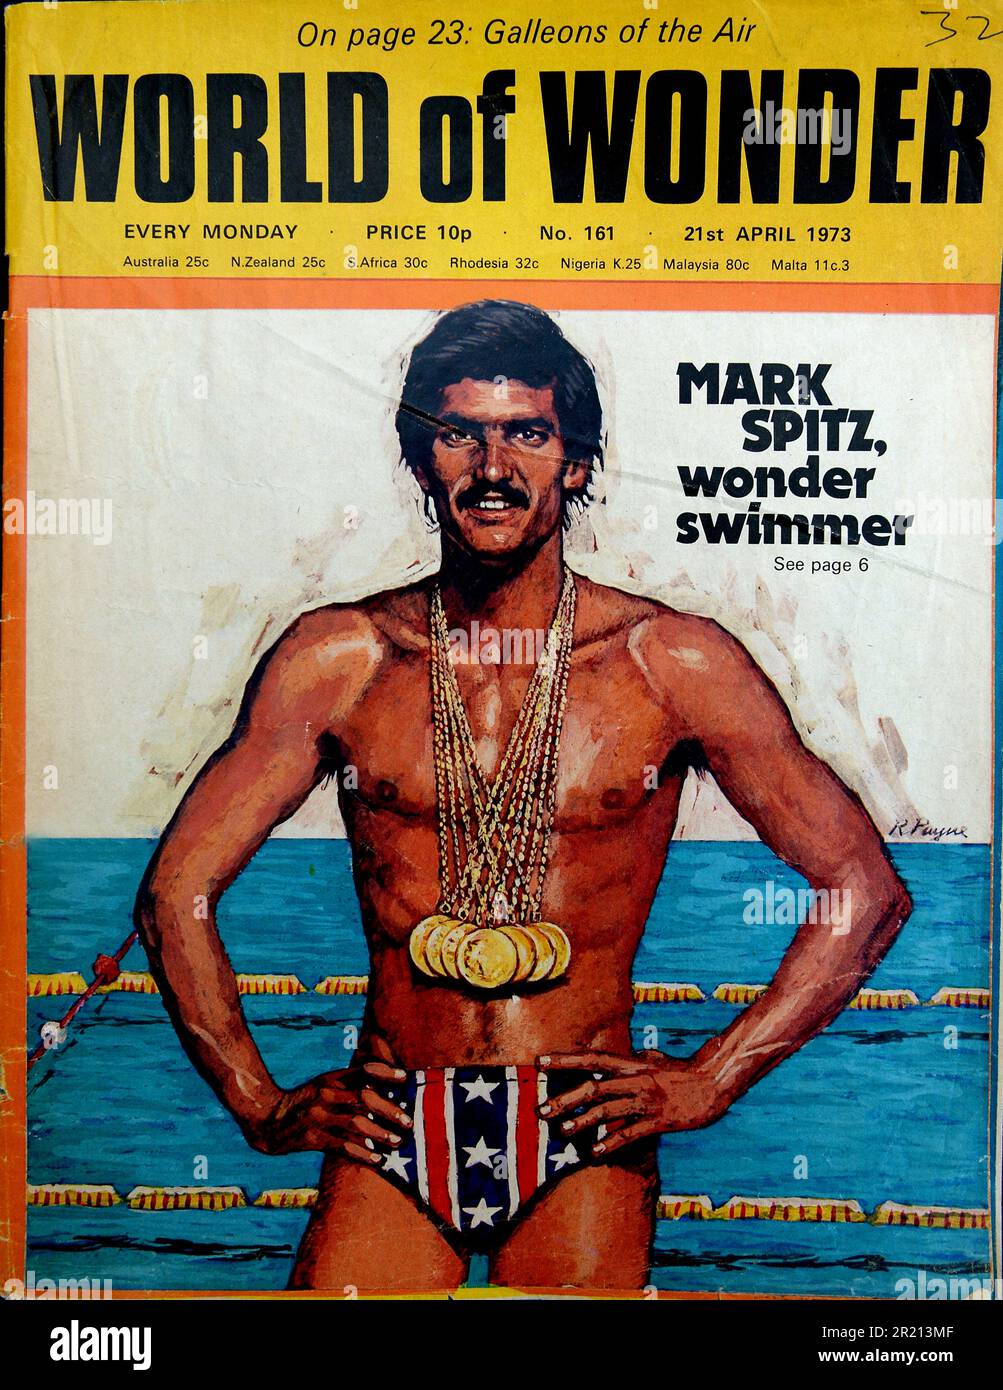 An edition of the magazine World of Wonder published in the 1970s, reports on the Olympic swimmer Mark Spitz. World of Wonder was a British educational magazine for children published by IPC's Fleetway Publications (formerly Amalgamated Press) from 1970 to 1975. Stock Photo